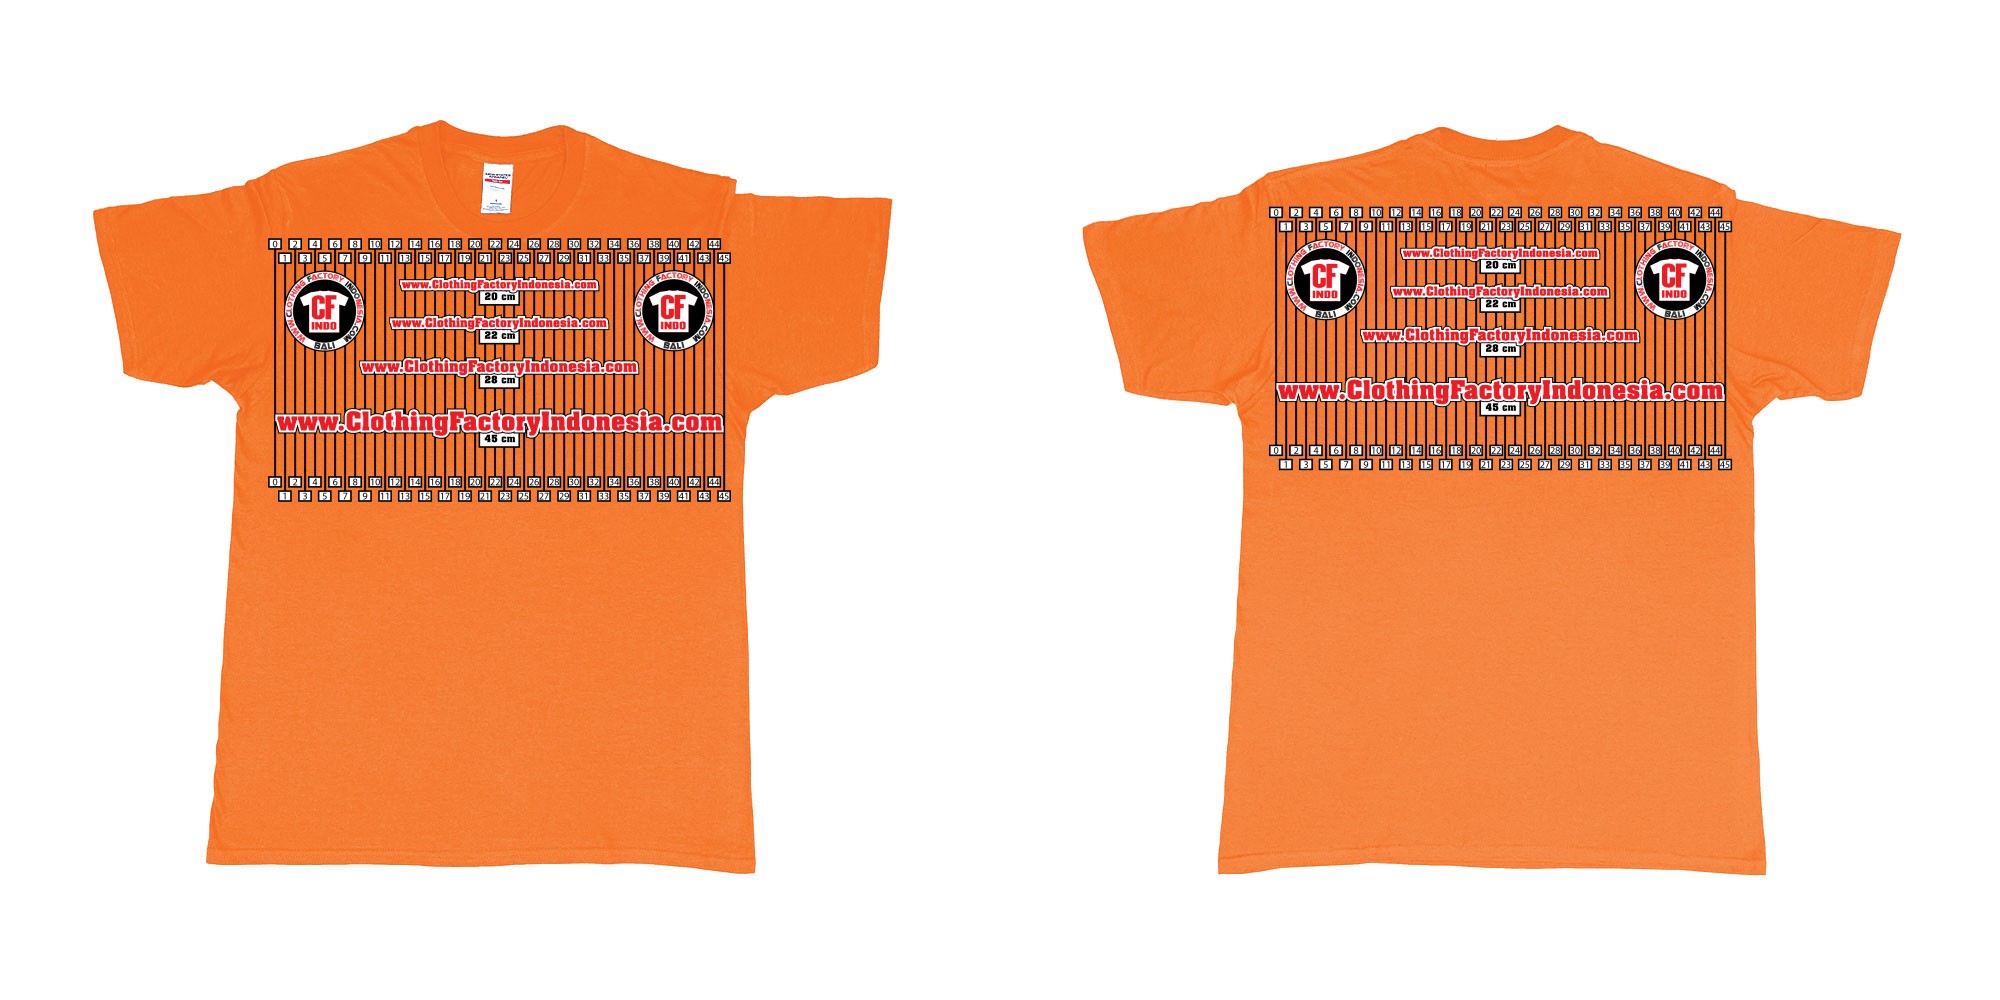 Custom tshirt design 20cm 22cm 30cm 45cm printing front back tshirt sample in fabric color orange choice your own text made in Bali by The Pirate Way